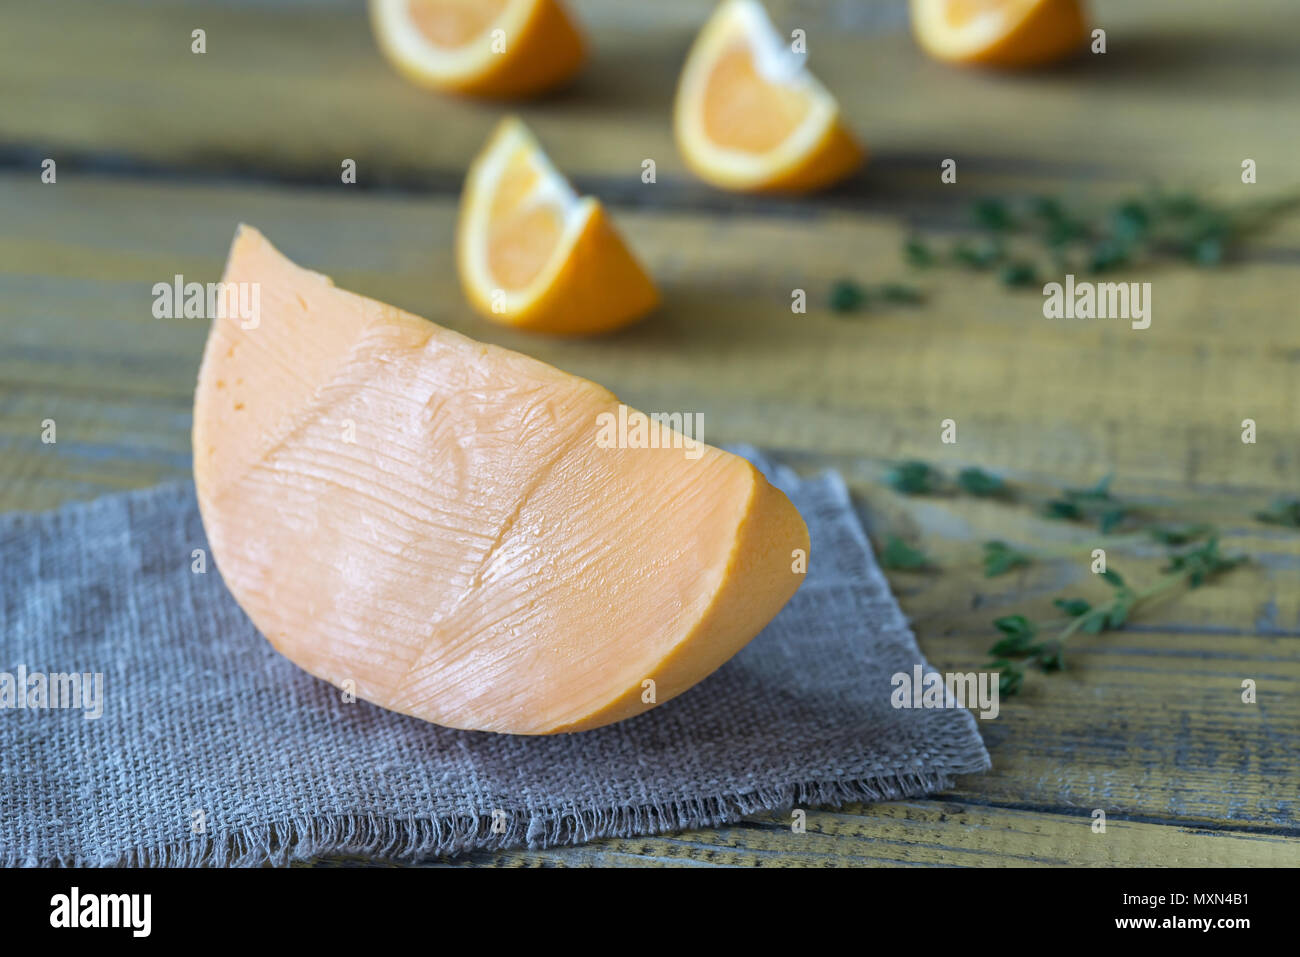 Mimolette cheese on the wooden board Stock Photo